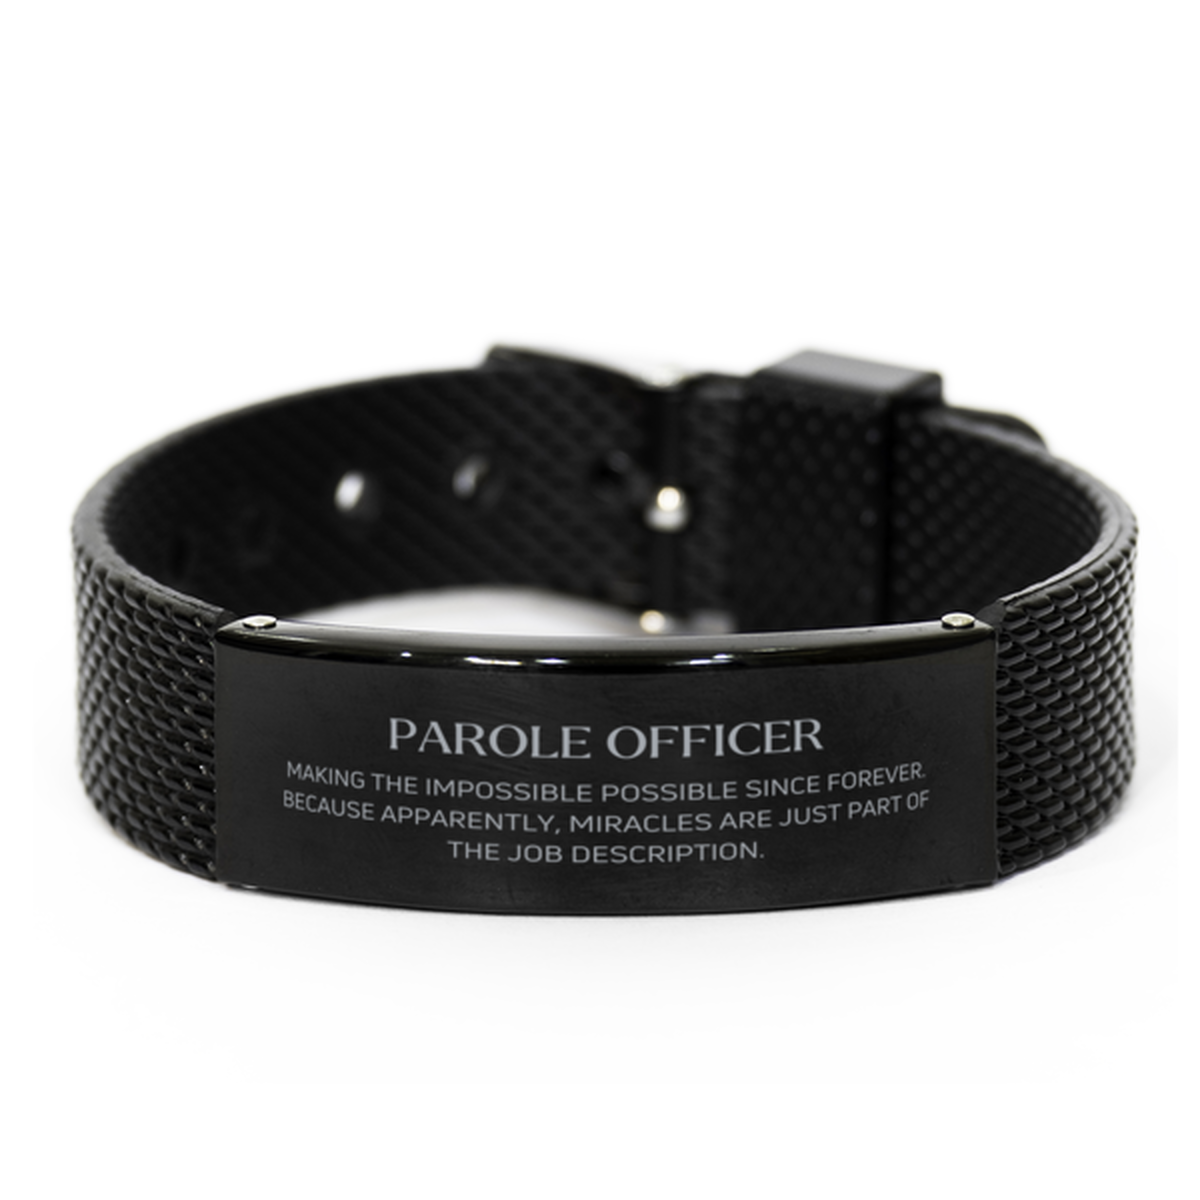 Funny Parole Officer Gifts, Miracles are just part of the job description, Inspirational Birthday Black Shark Mesh Bracelet For Parole Officer, Men, Women, Coworkers, Friends, Boss